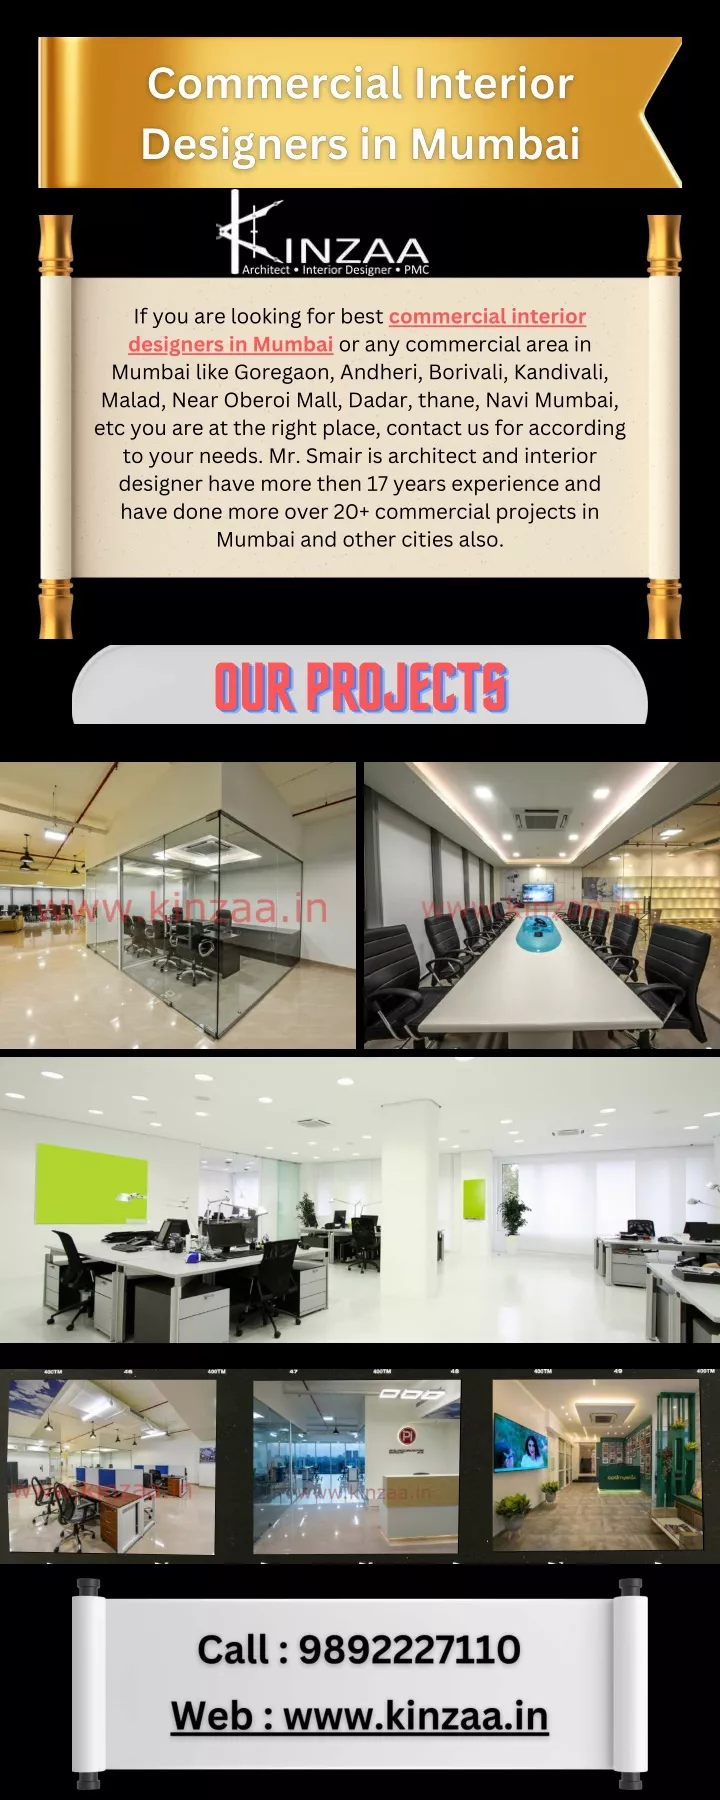 if you are looking for best commercial interior